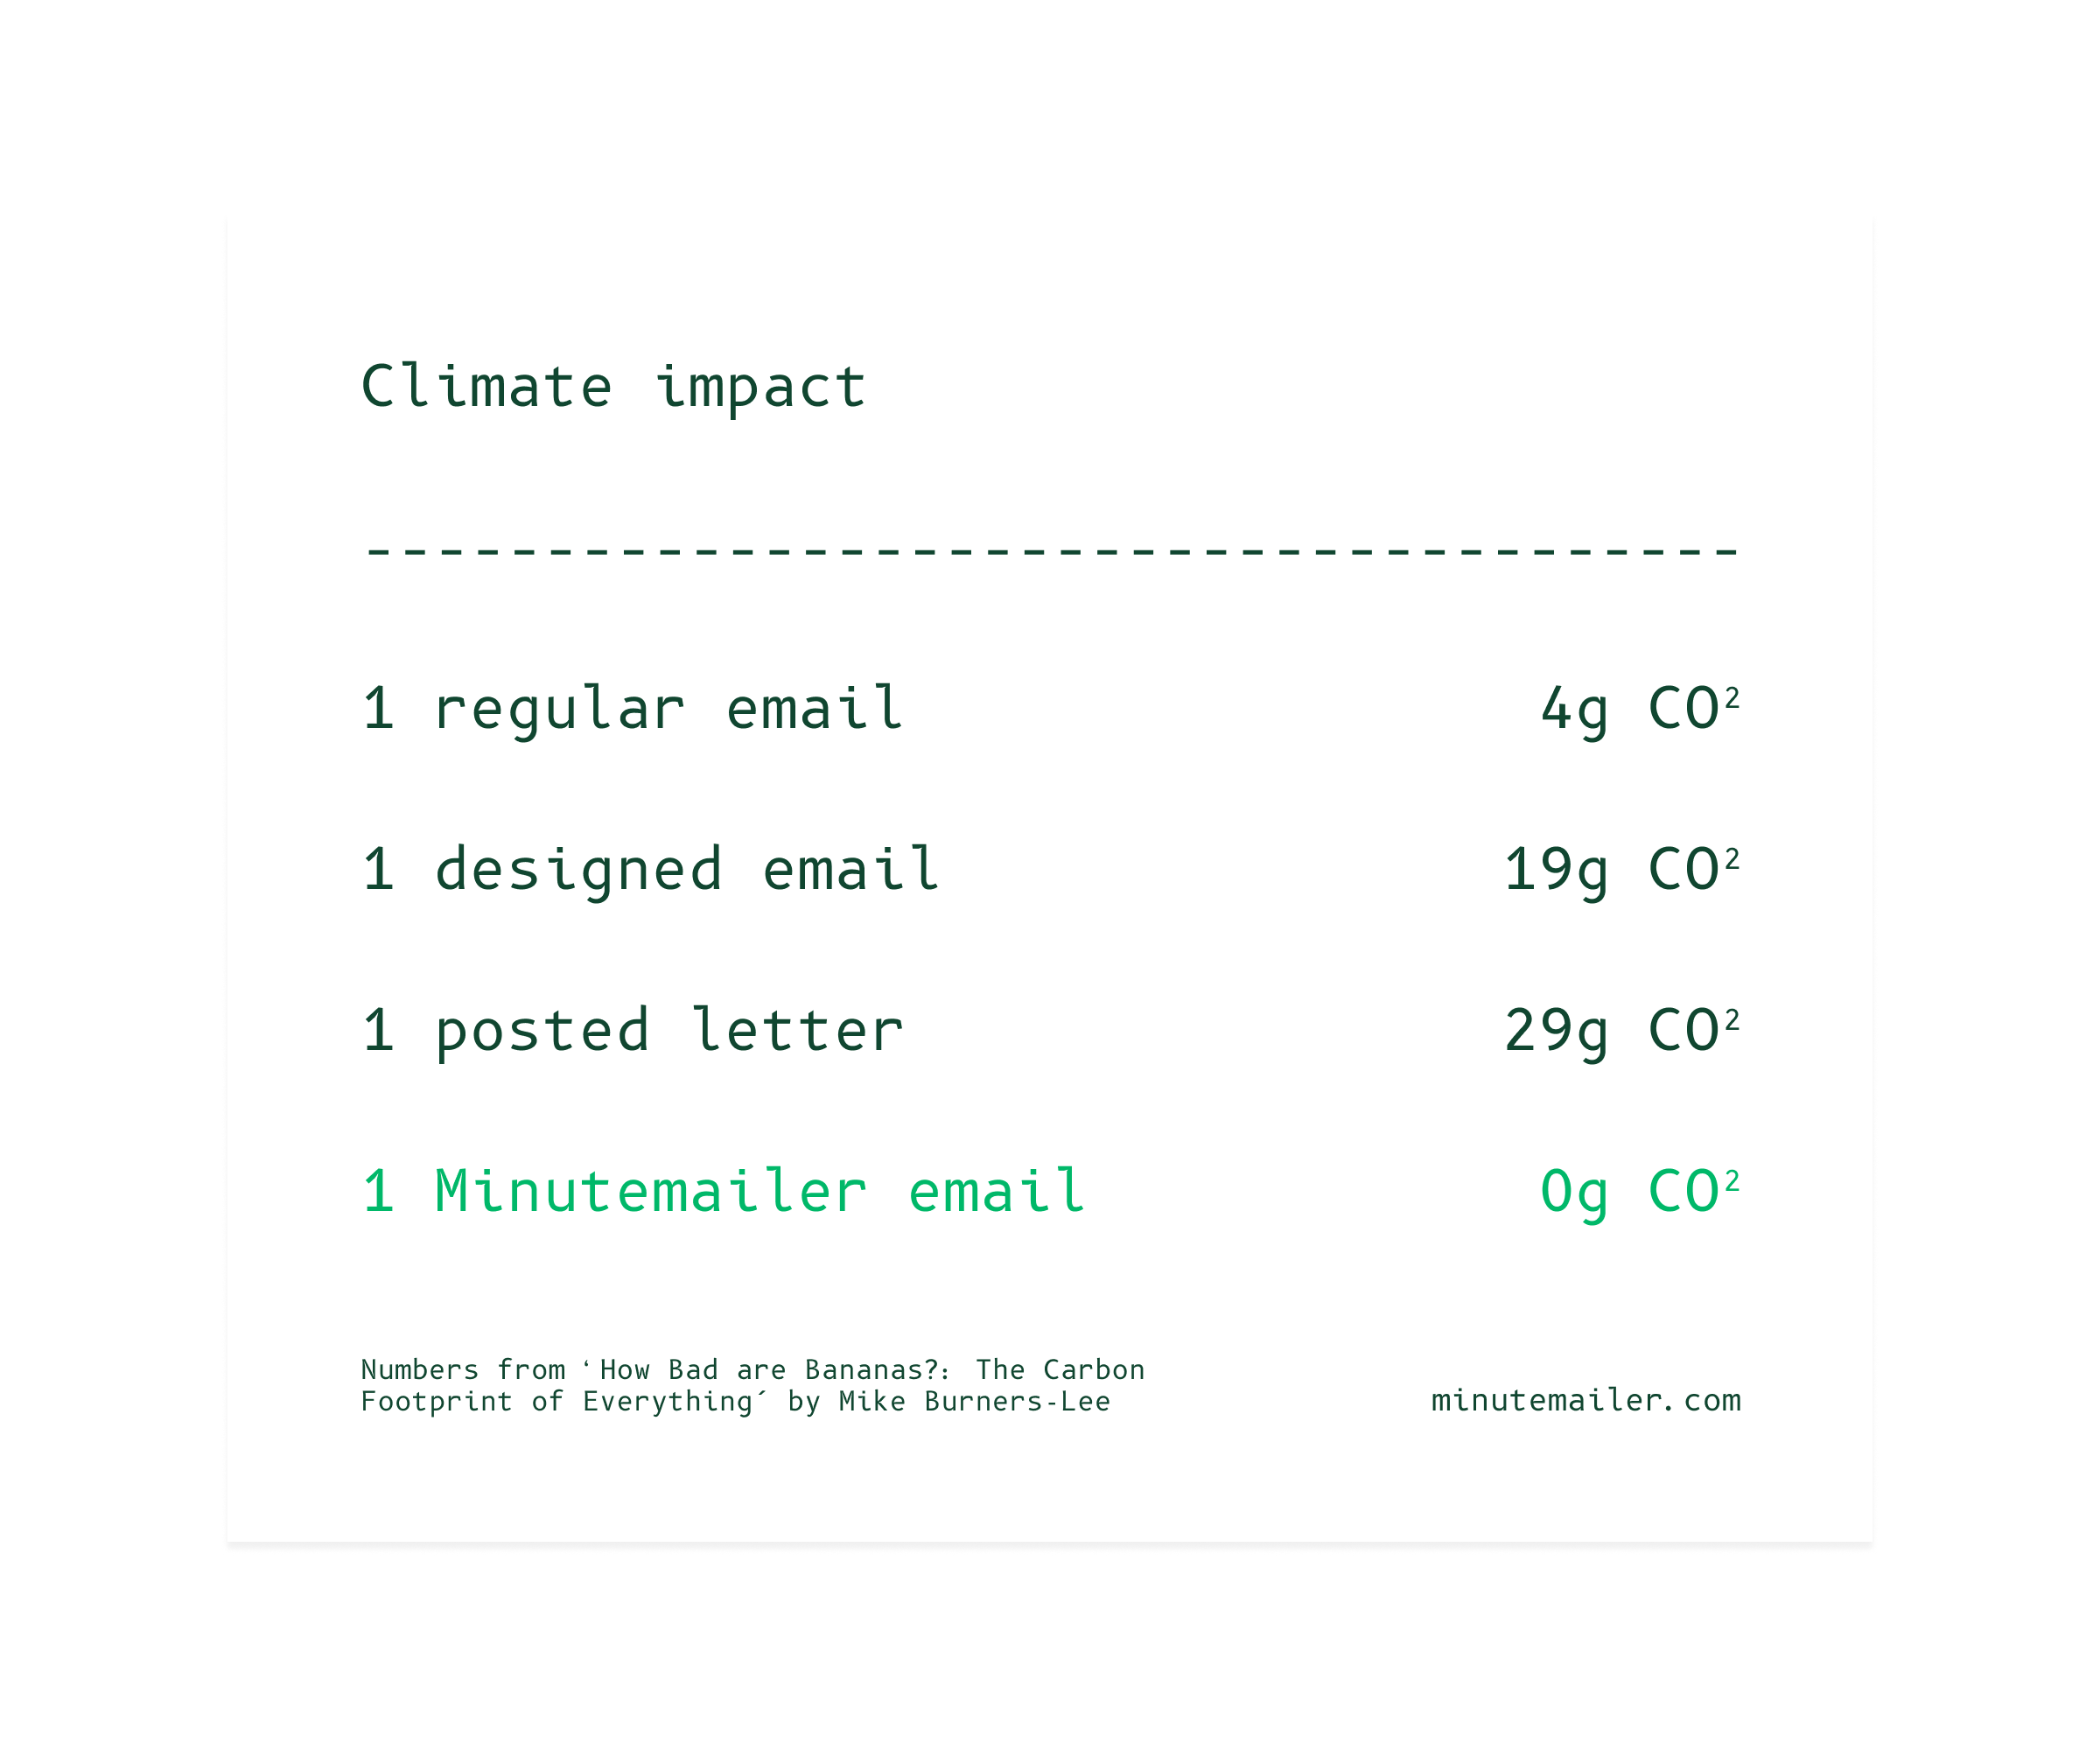 CO2 from emails